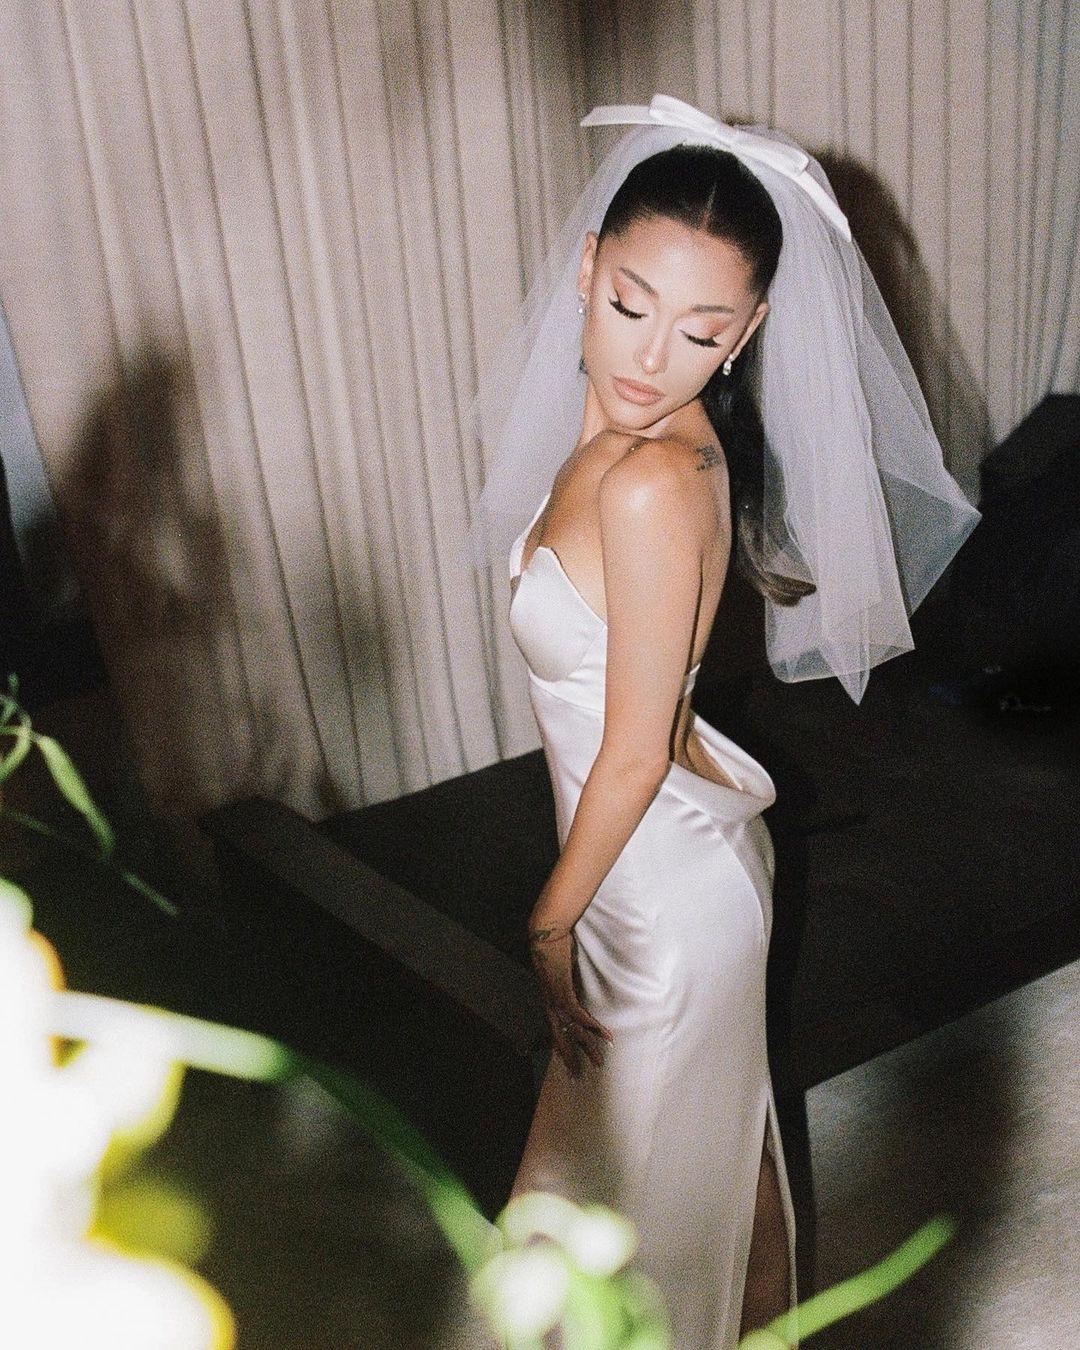 Vera Wang Interview: How She Got Started in Fashion, Her Best